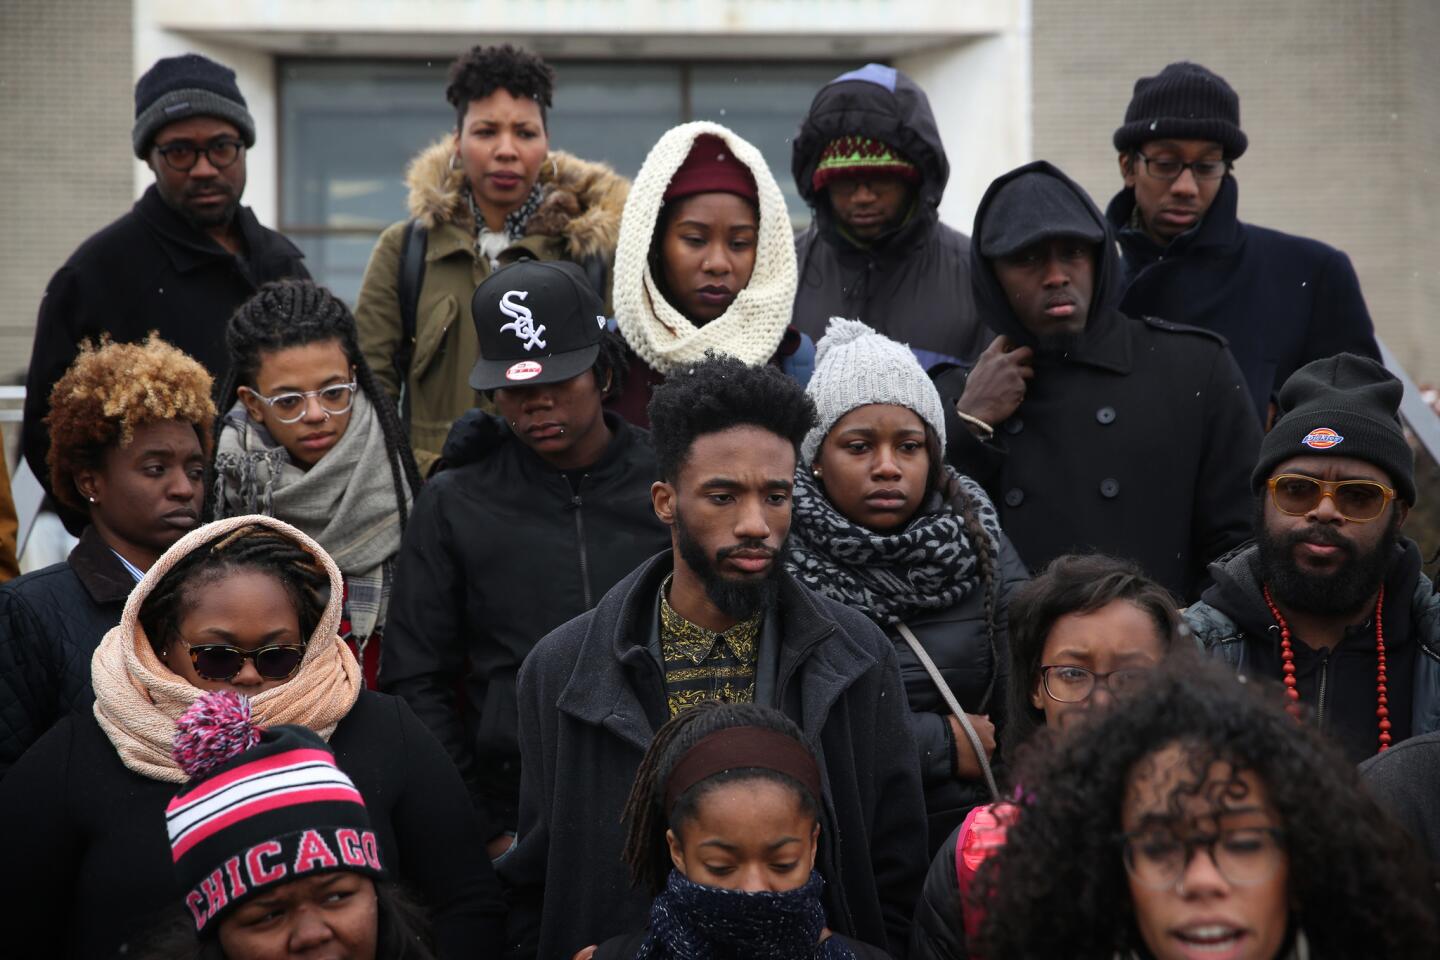 A group of African-American activists holds a news conference at the 2nd District Chicago Police Department headquarters on Nov. 23, 2015, about the impending release of a video showing the shooting death by a police officer of African-American teen Laquan McDonald.